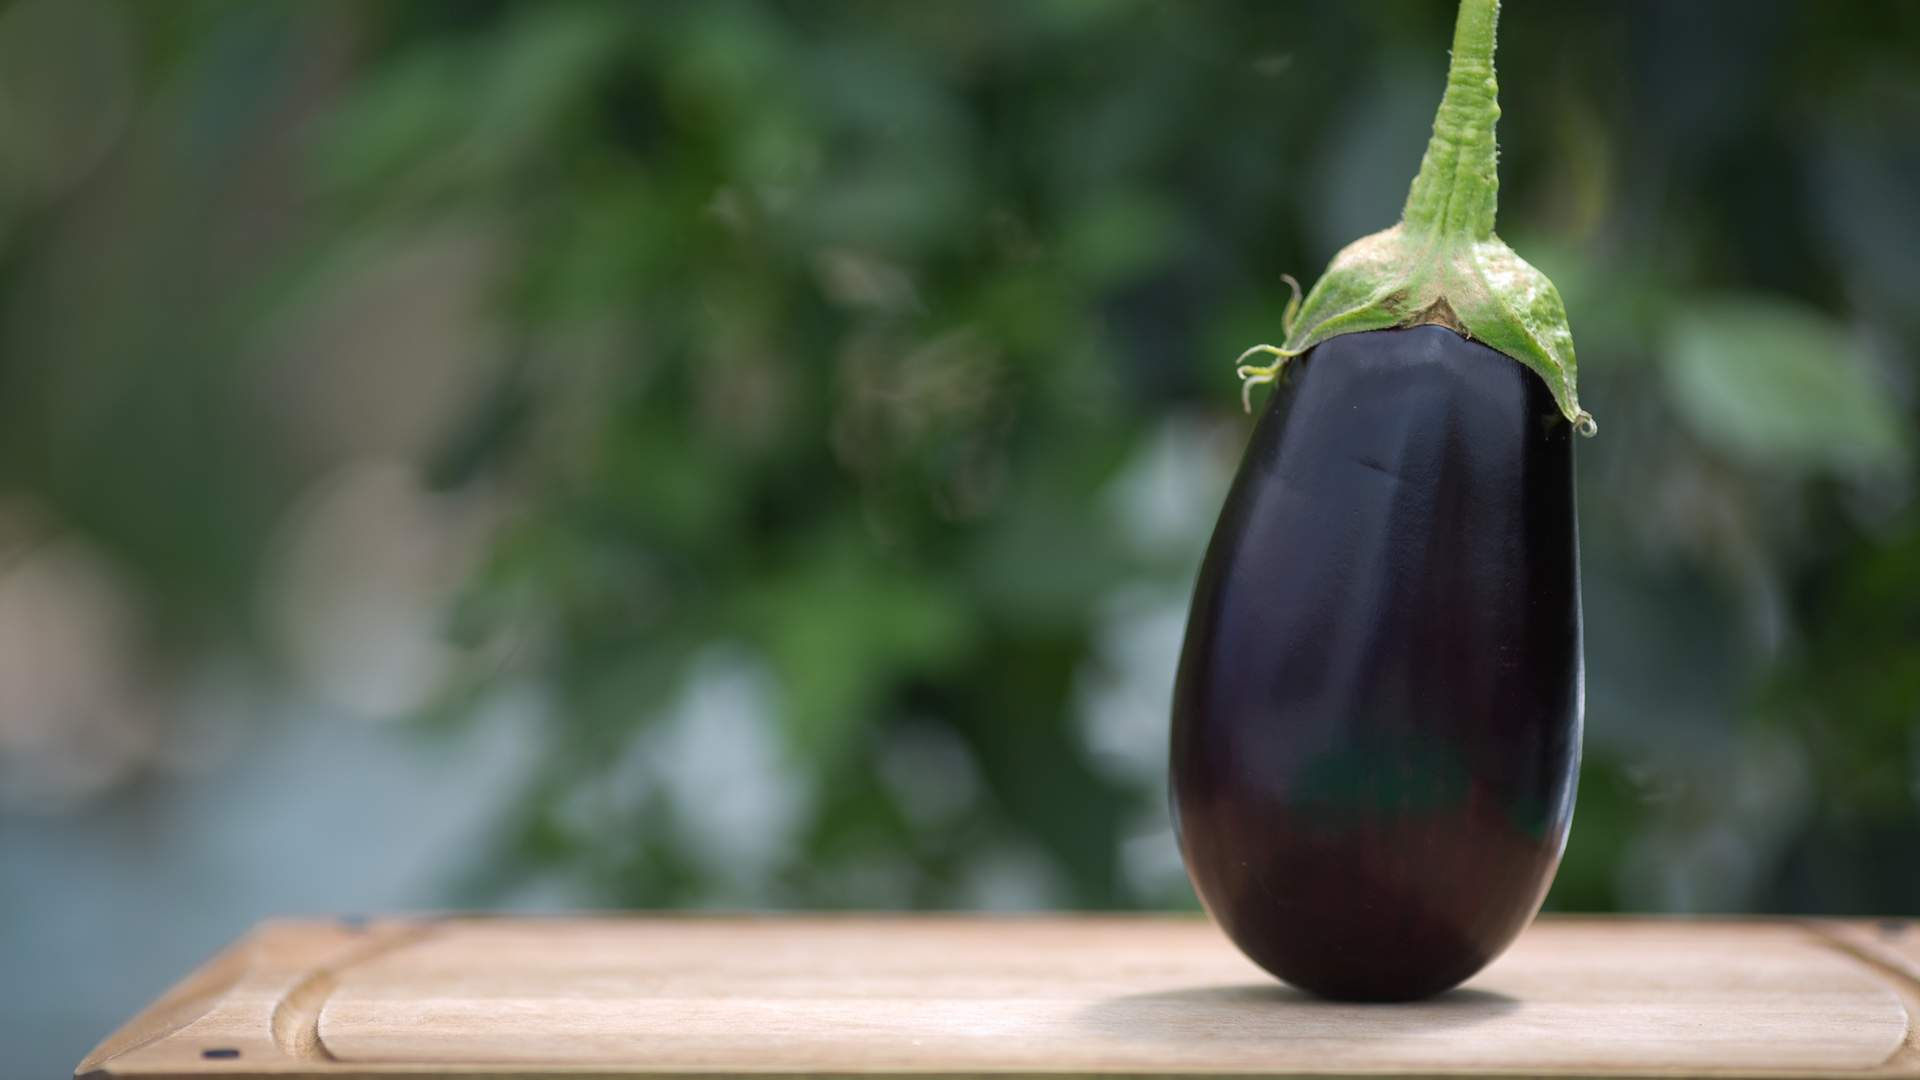 This New Service Lets You Send People Anonymous Eggplants for Some Reason